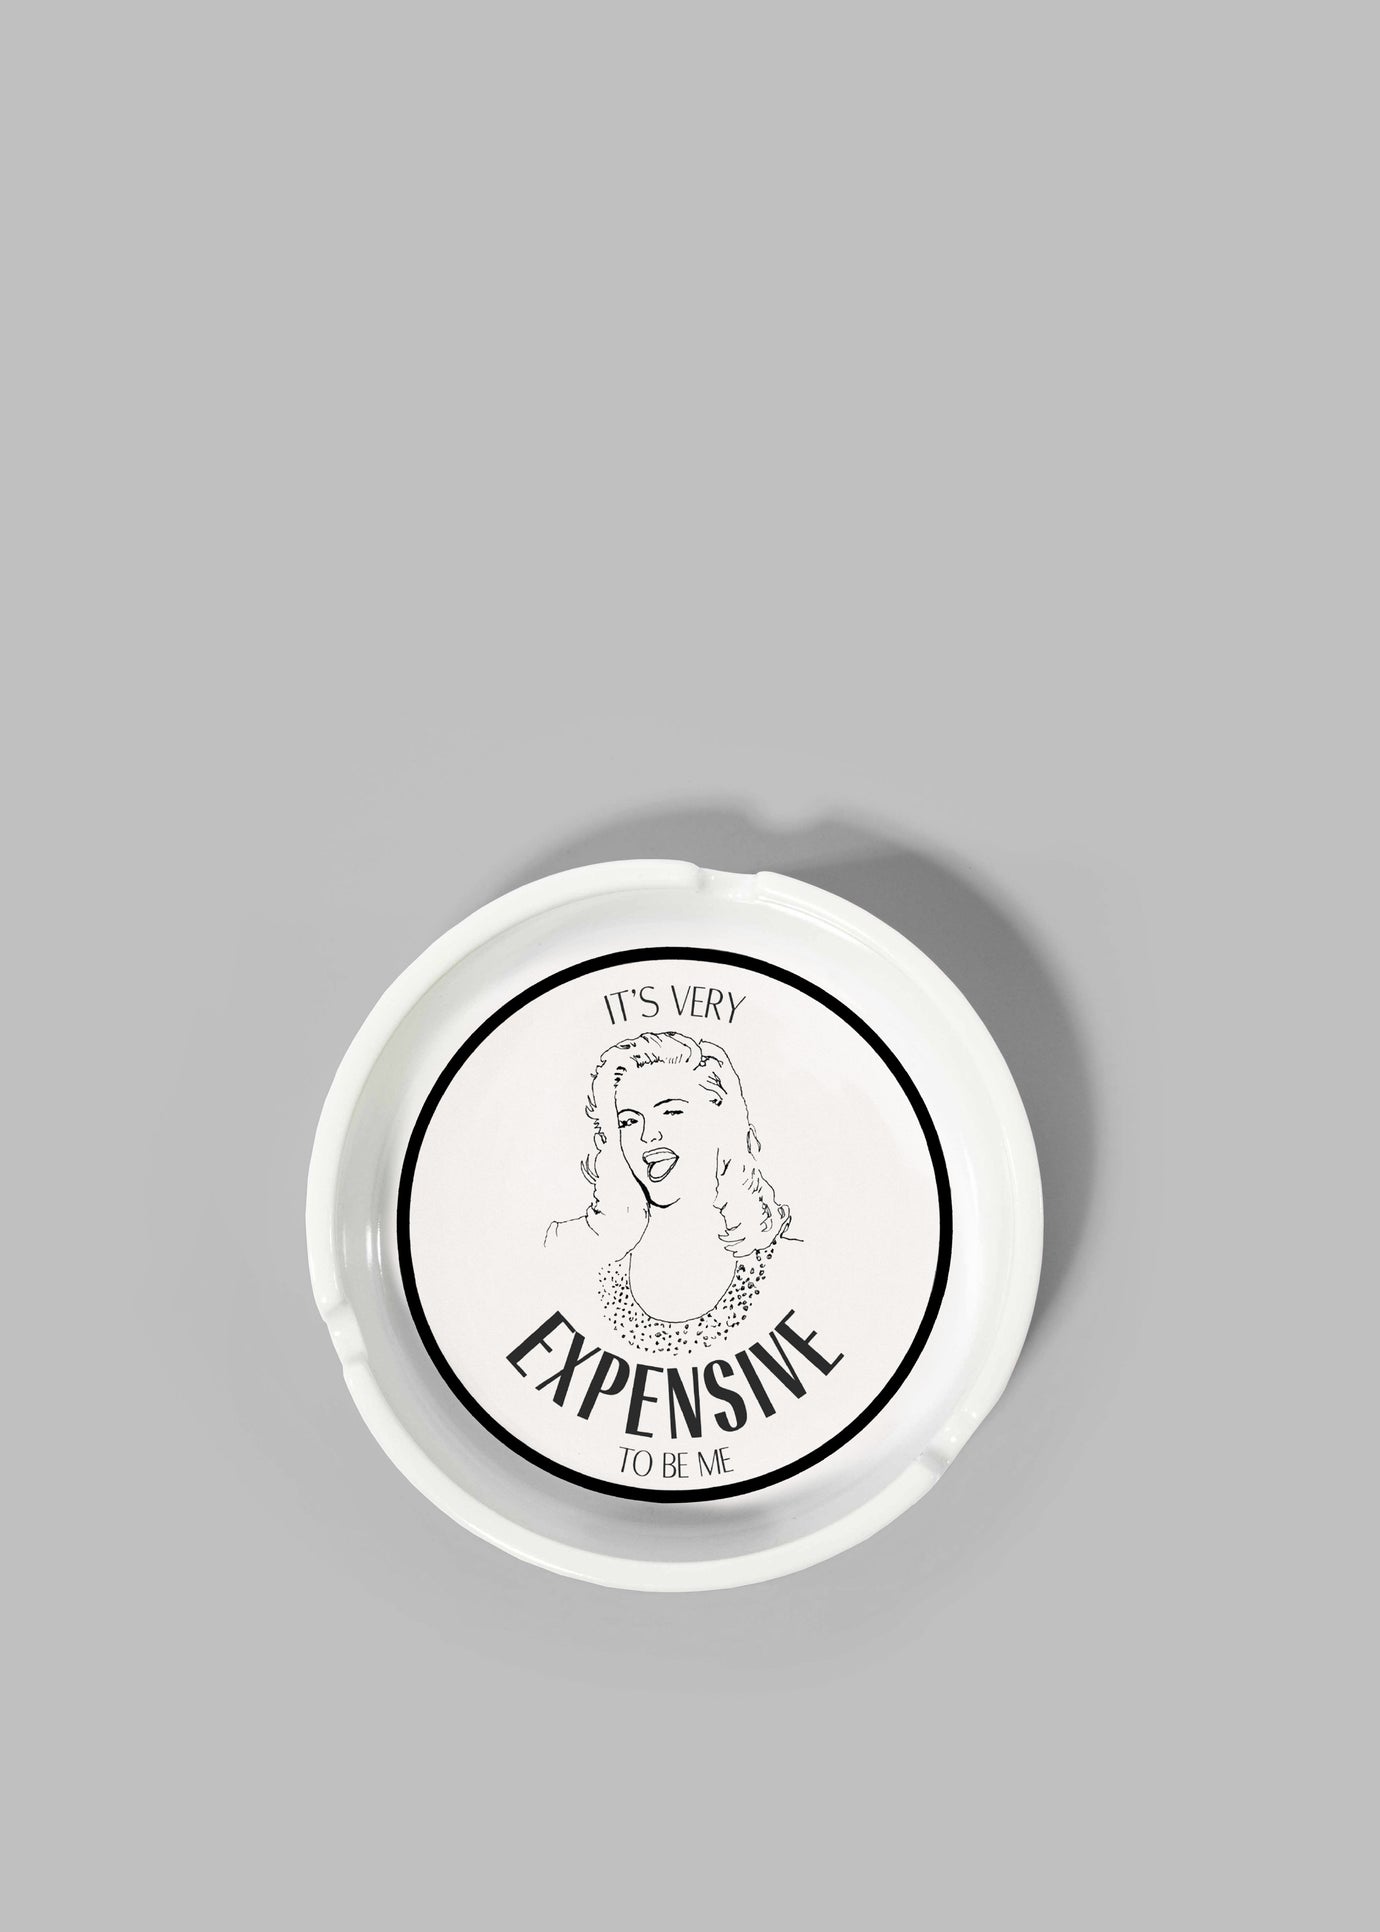 THNK1994 "It's Very Expensive to be Me" Ashtray - White